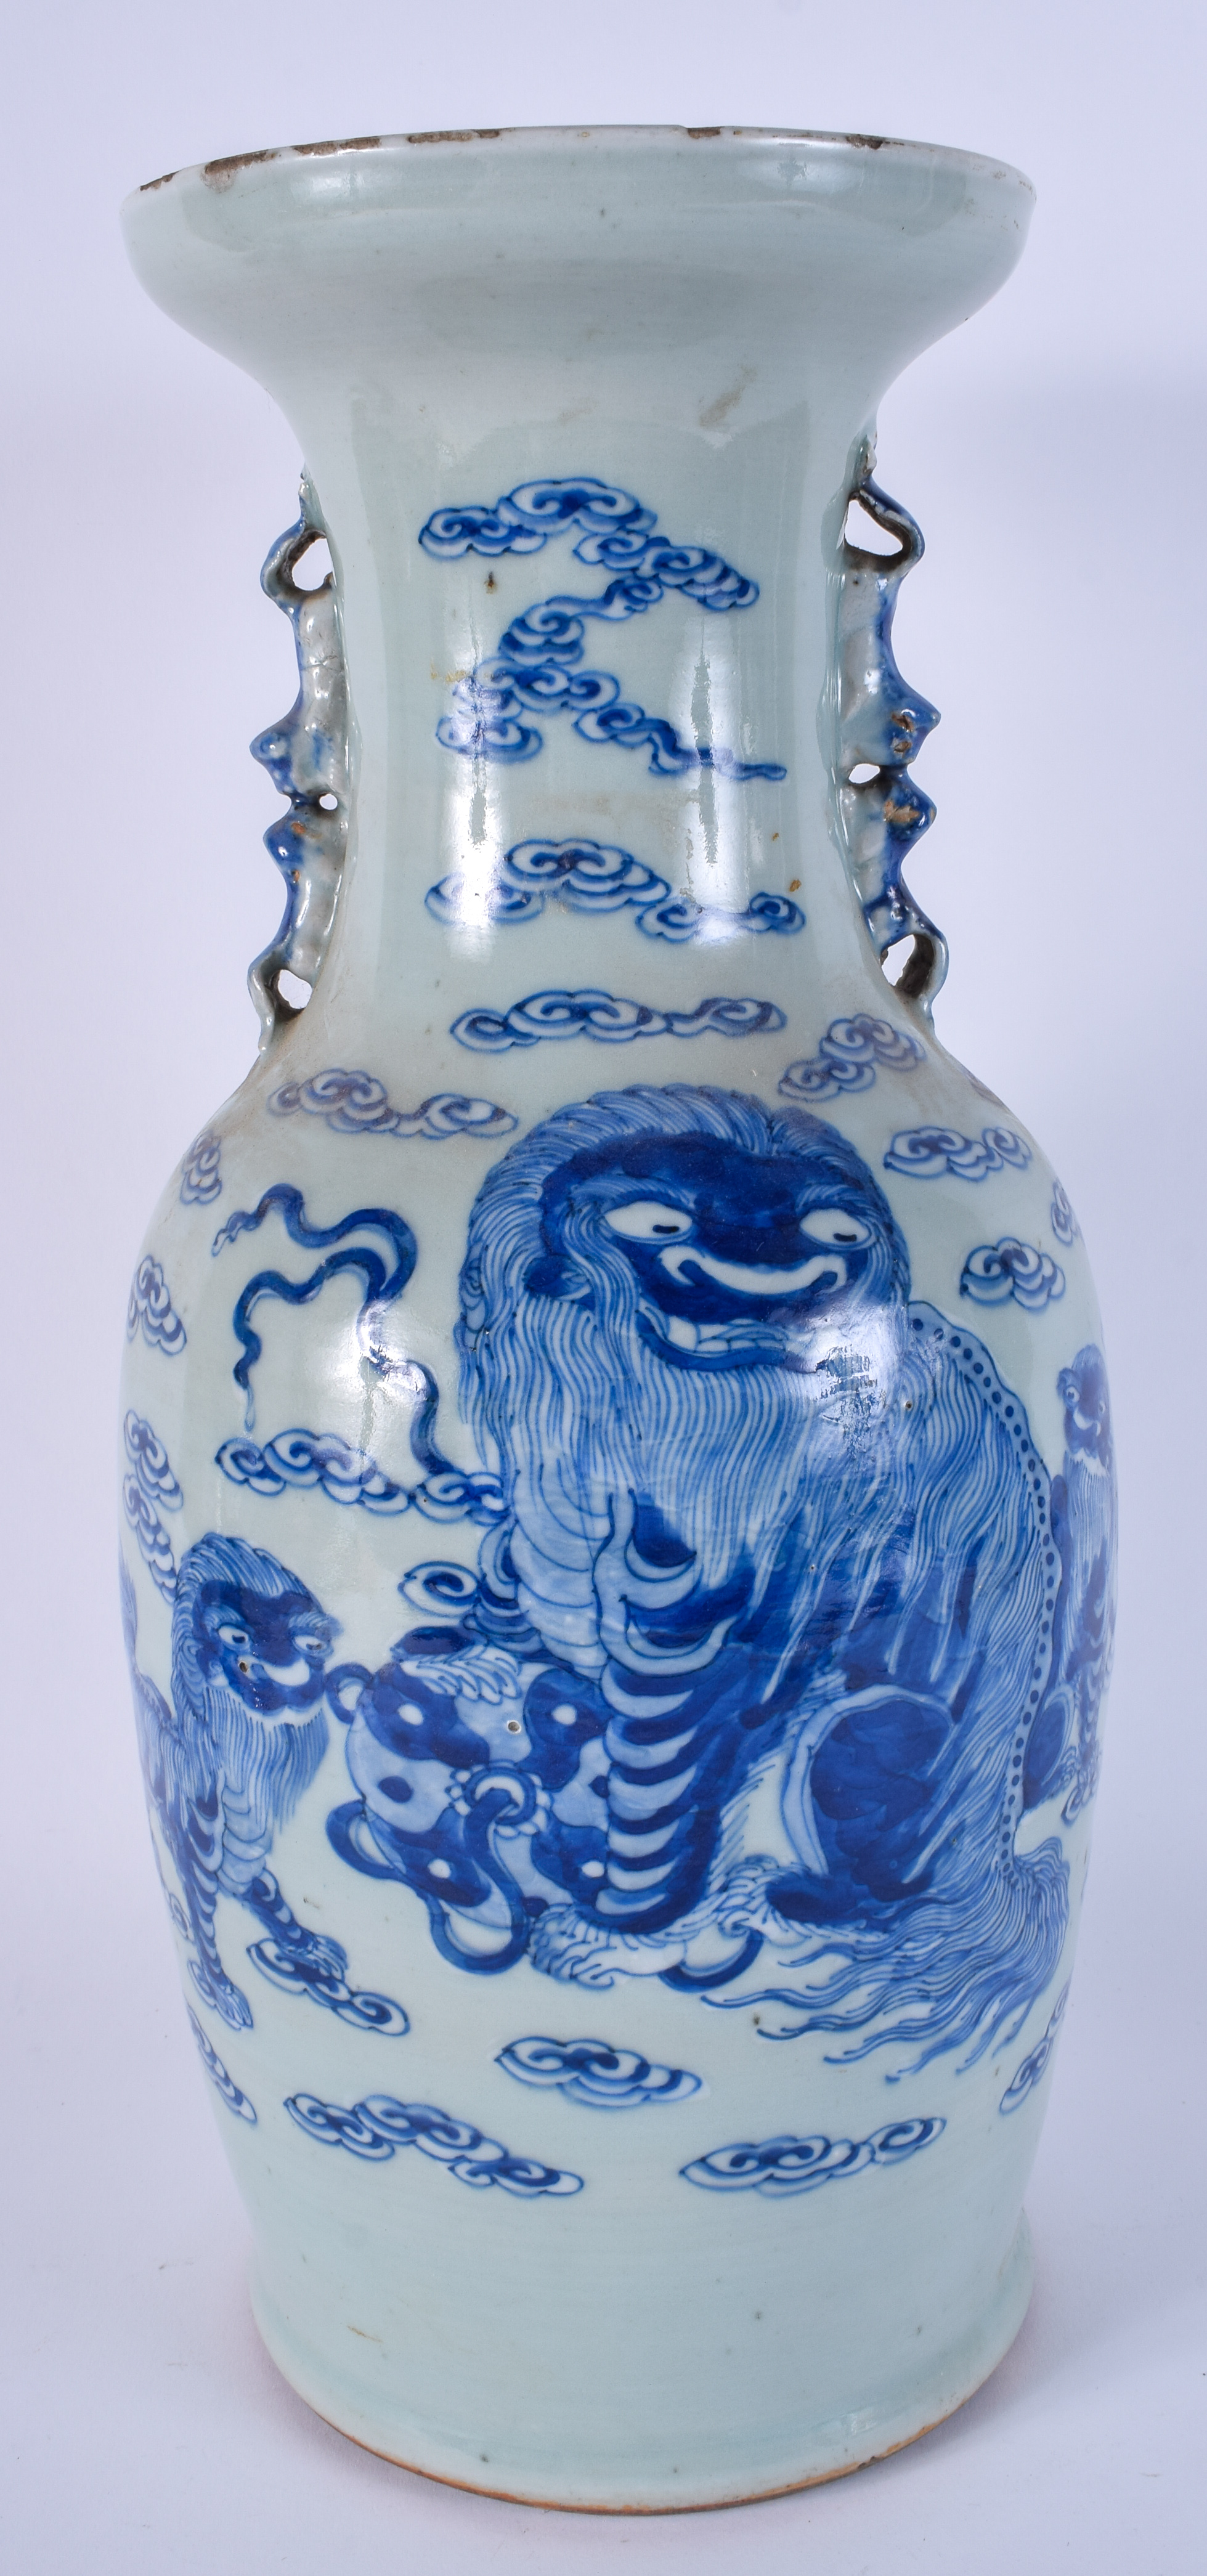 A LARGE 19TH CENTURY CHINESE TWIN HANDLED CELADON VASE Qing, painted with Buddhistic lions. 44 cm x